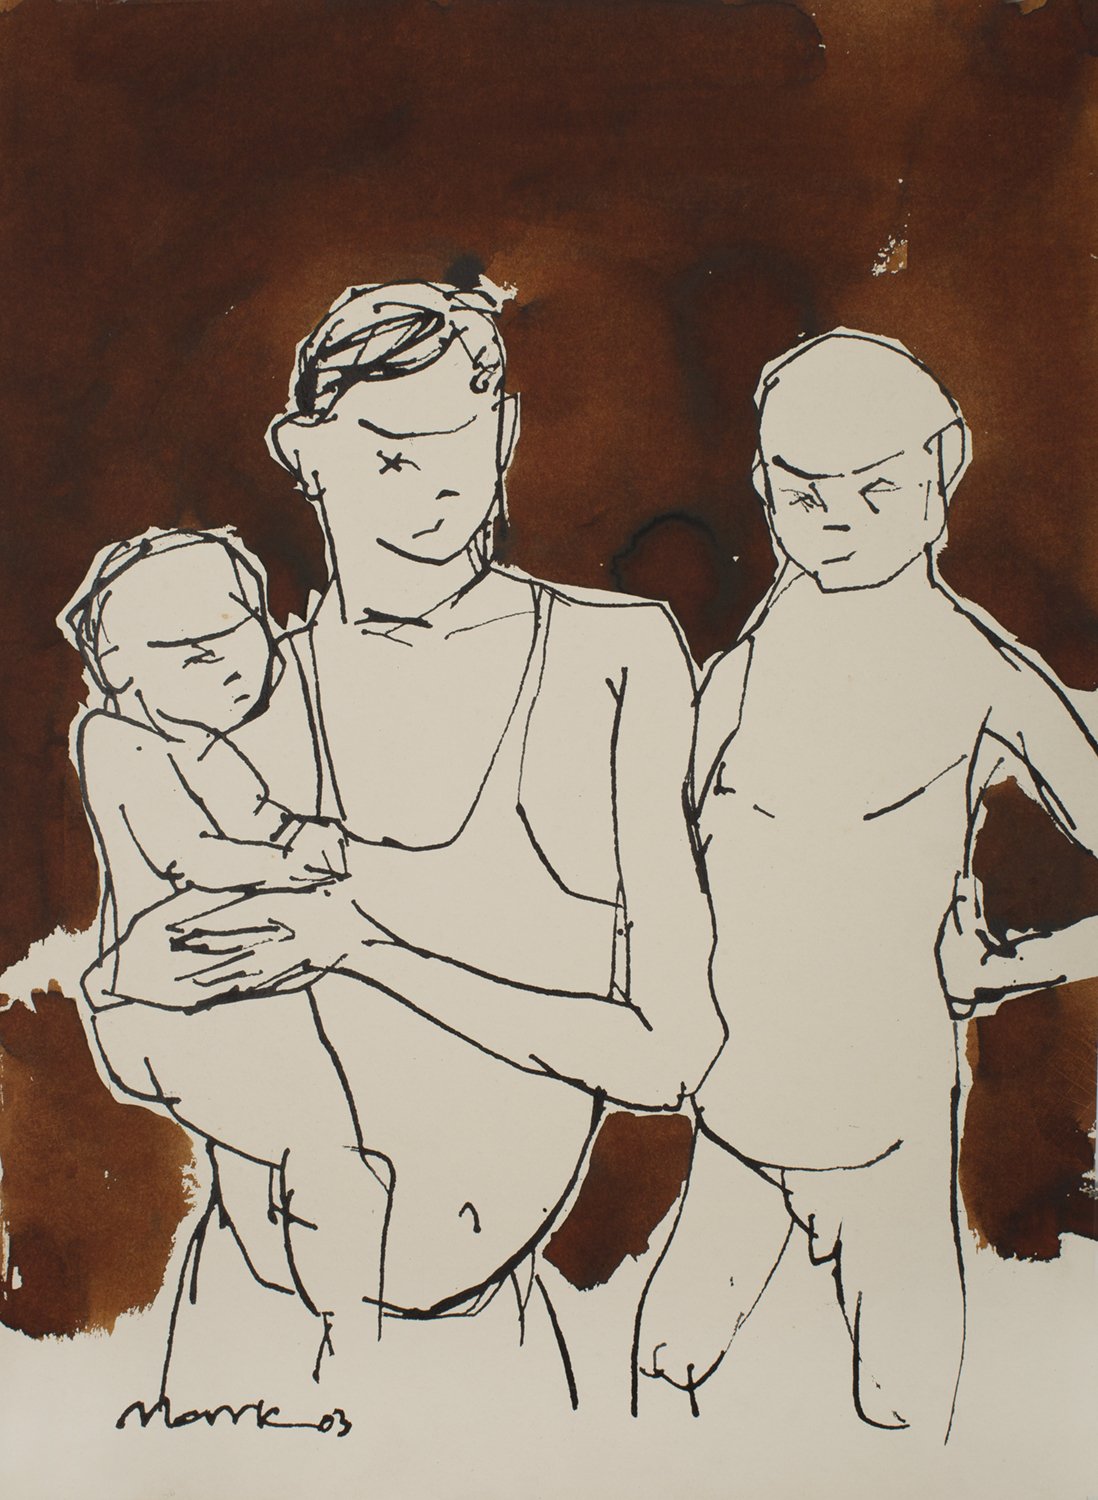 Father & Children|S. Mark Rathinaraj- Pen and Ink, , 21 x 15 inches